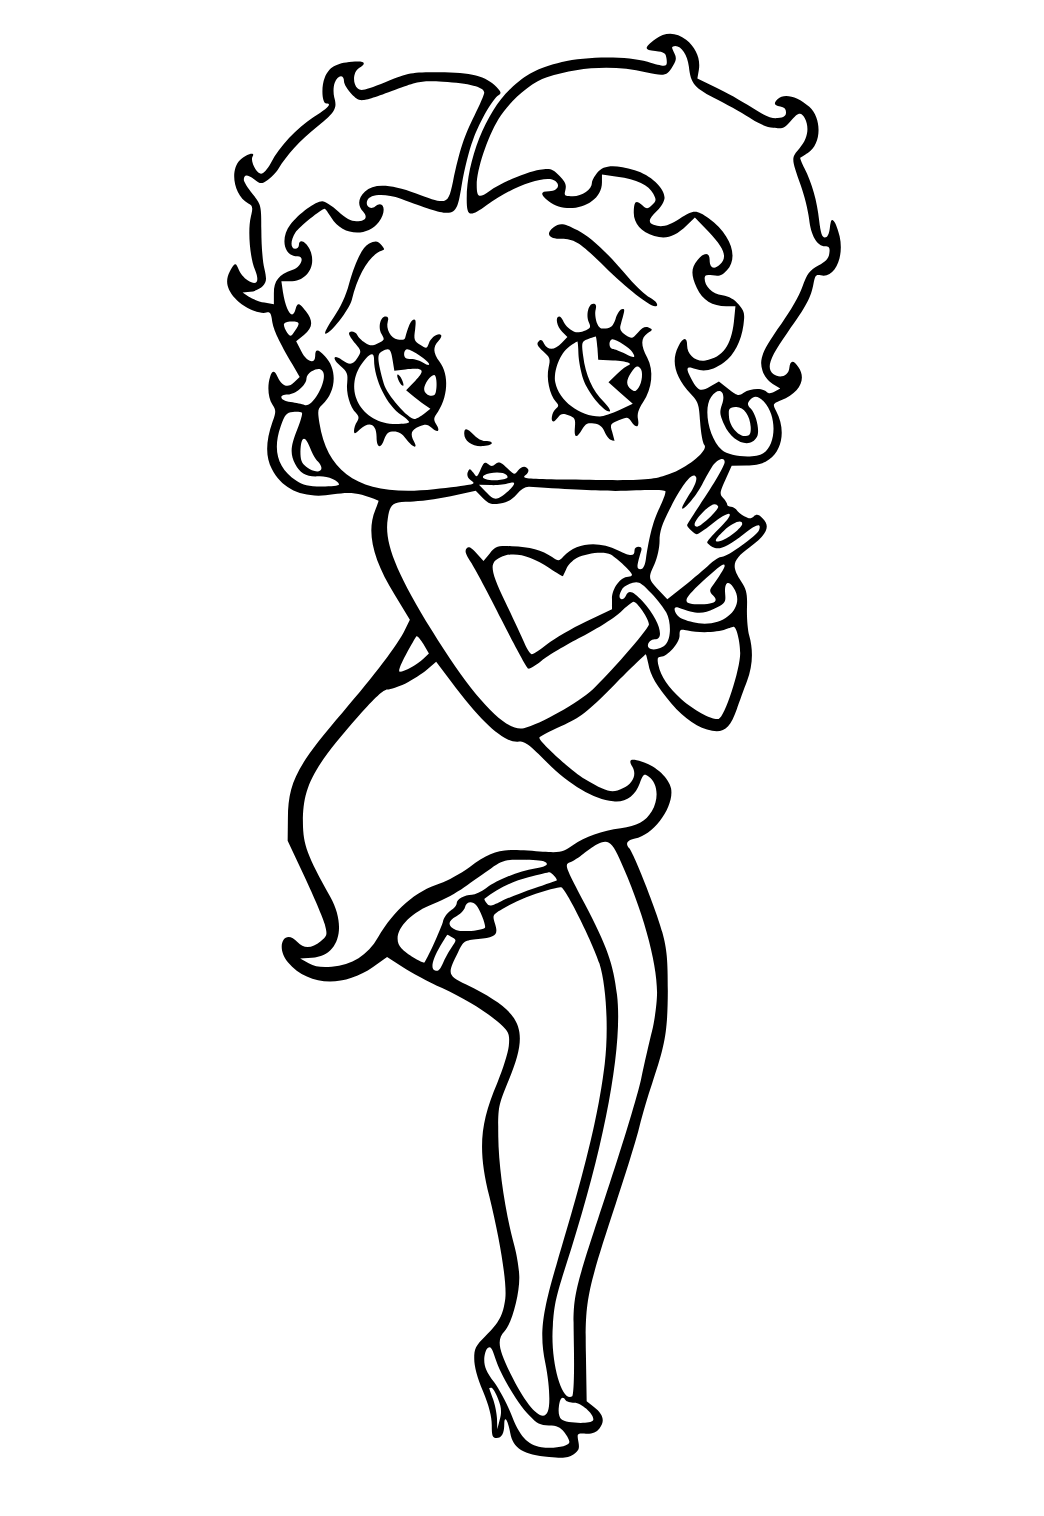 Free Printable Betty Boop Dress Coloring Page For Adults And Kids Lystok - Free Printable Betty Boop